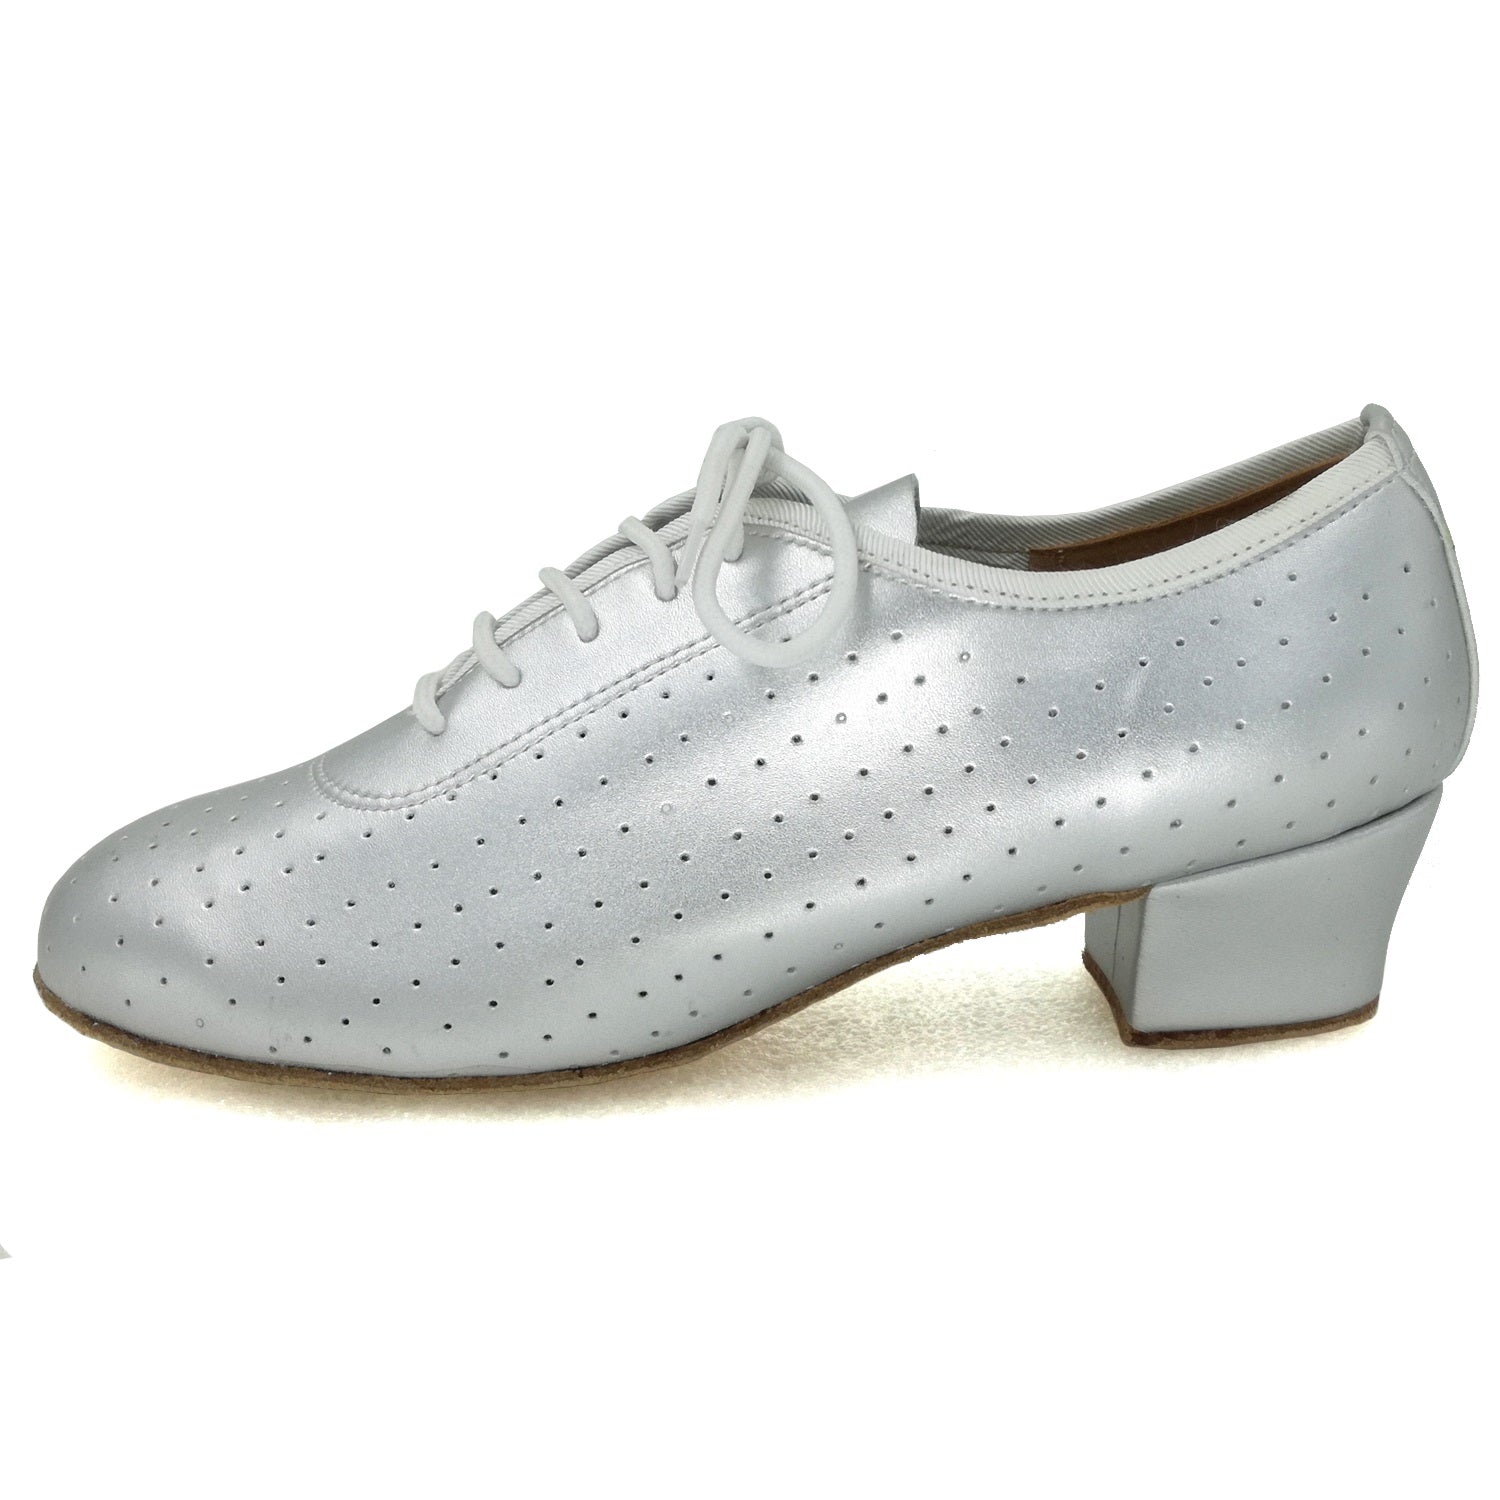 Women Ballroom Dancing Shoes with Suede Sole Lace-up Closed-toe in Silver for Tango Latin Practice (PD5002C)1